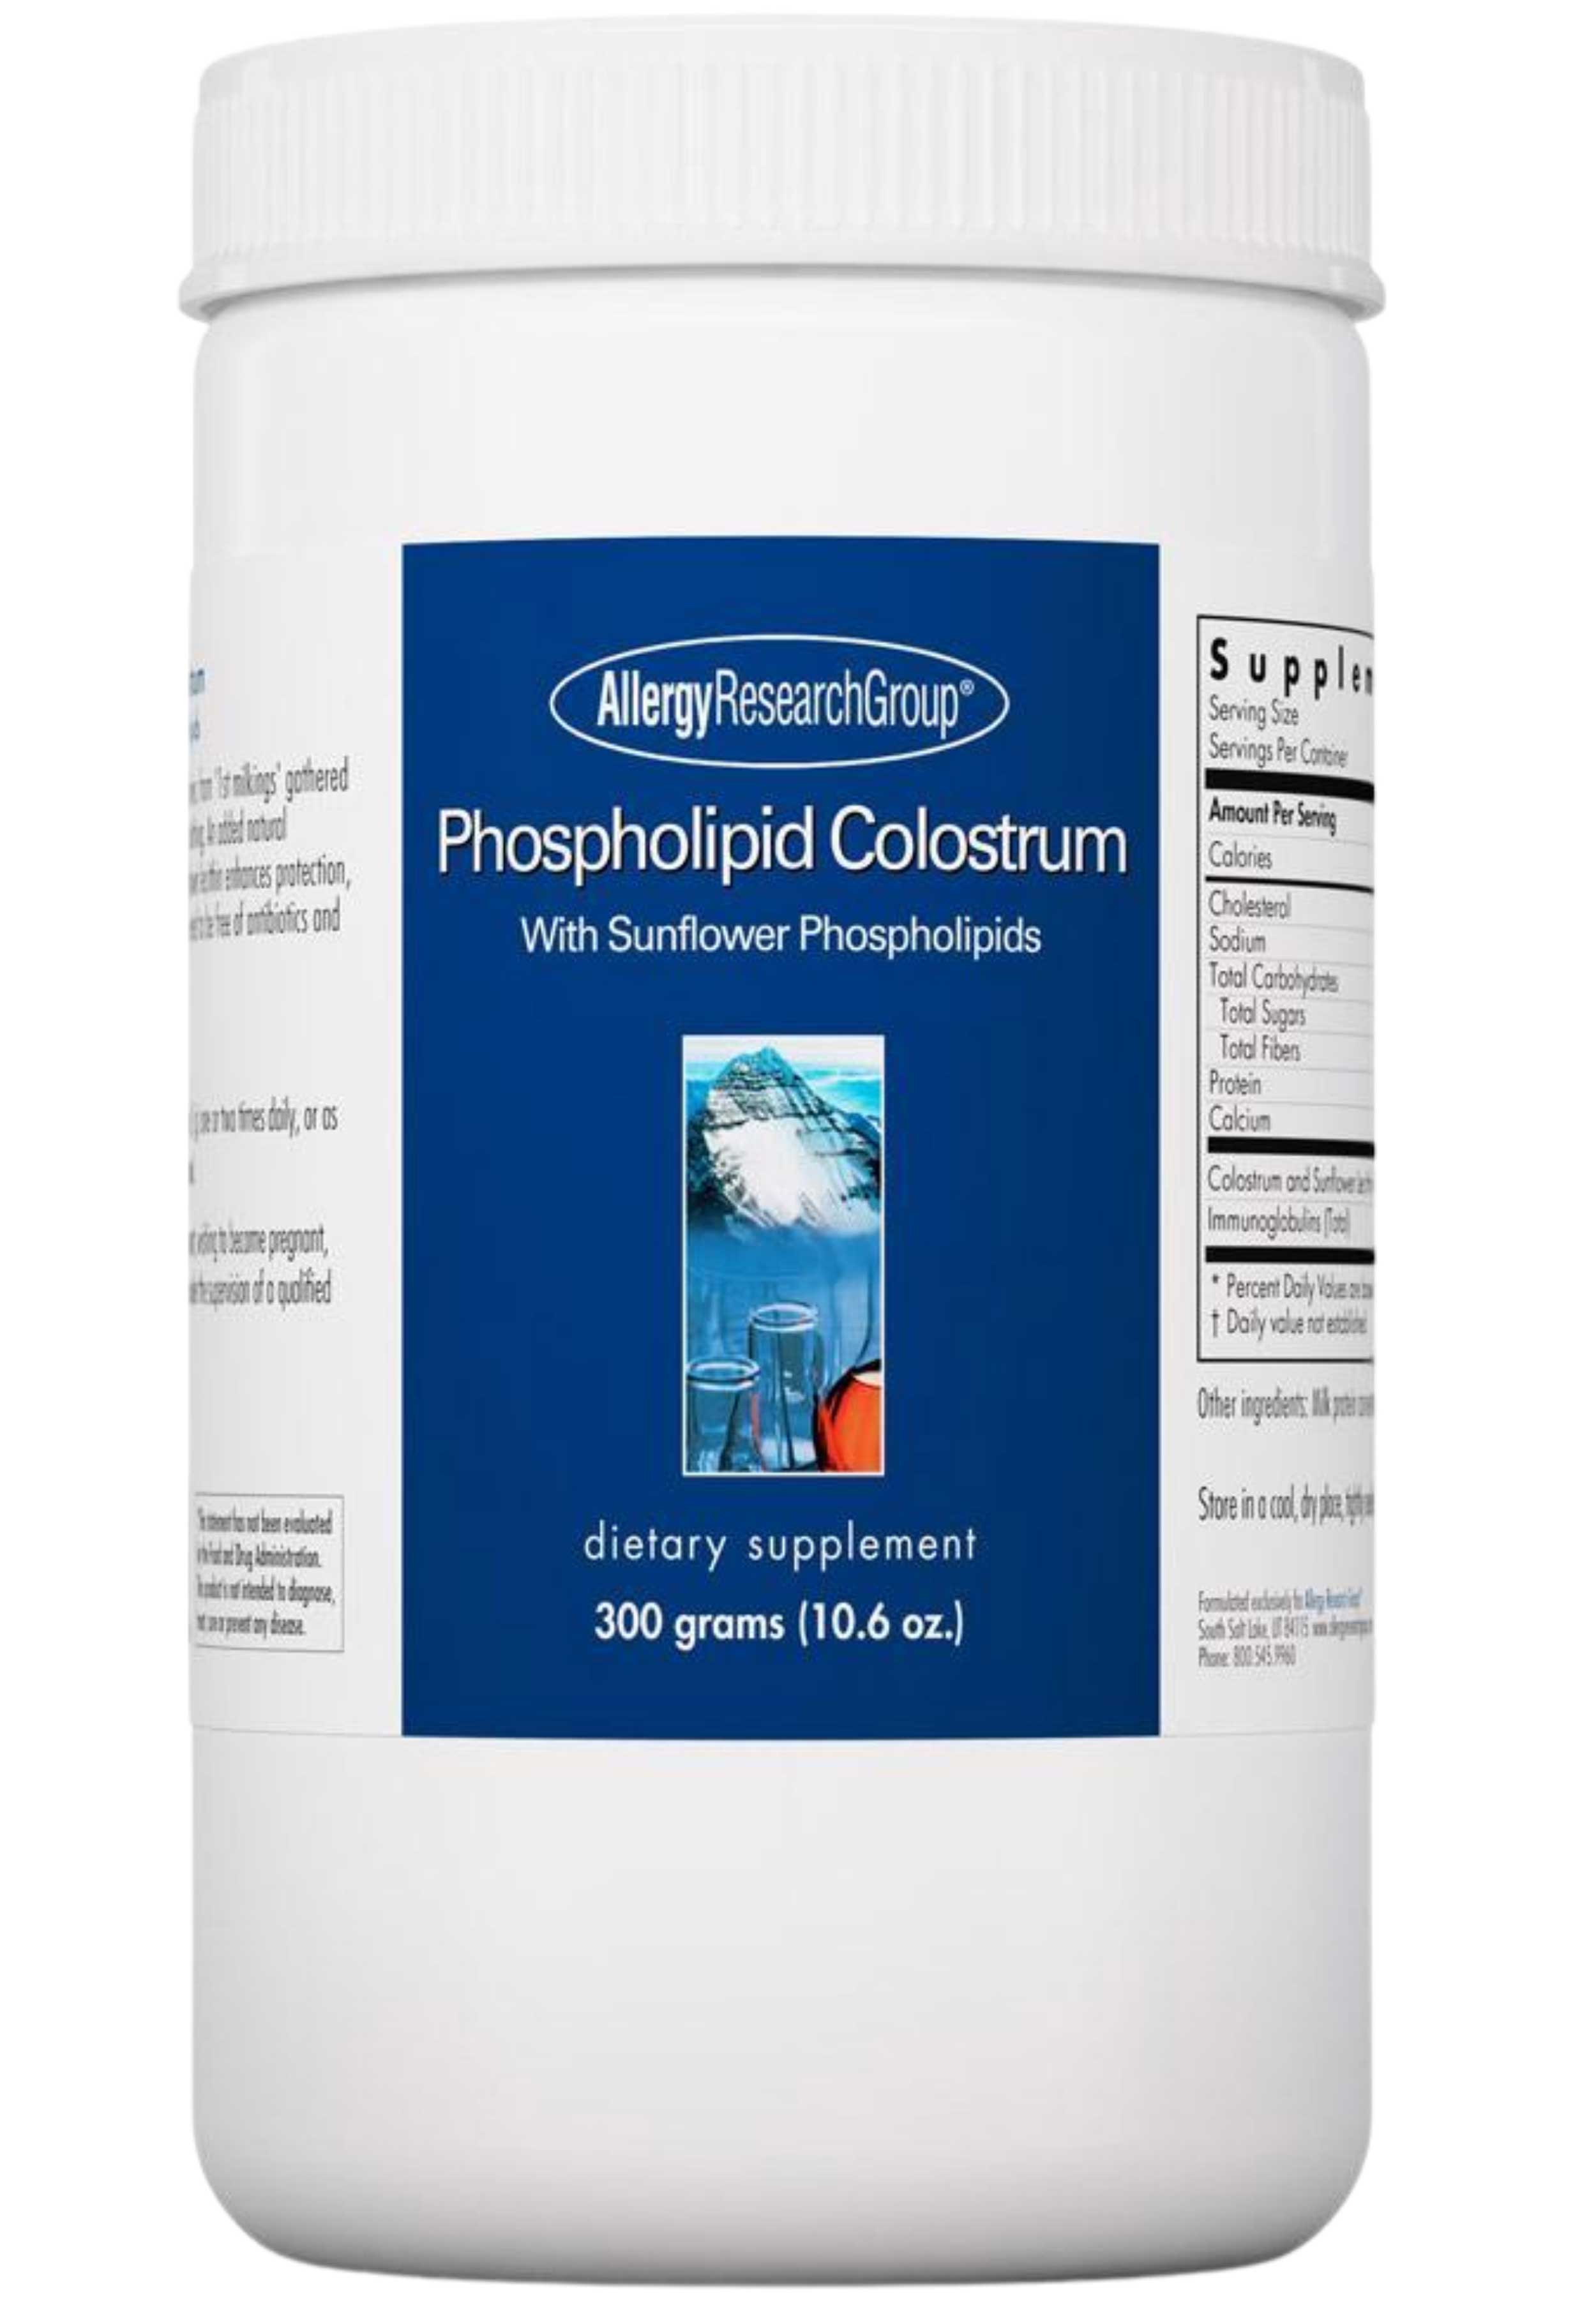 Allergy Research Group Phospholipid Colostrum